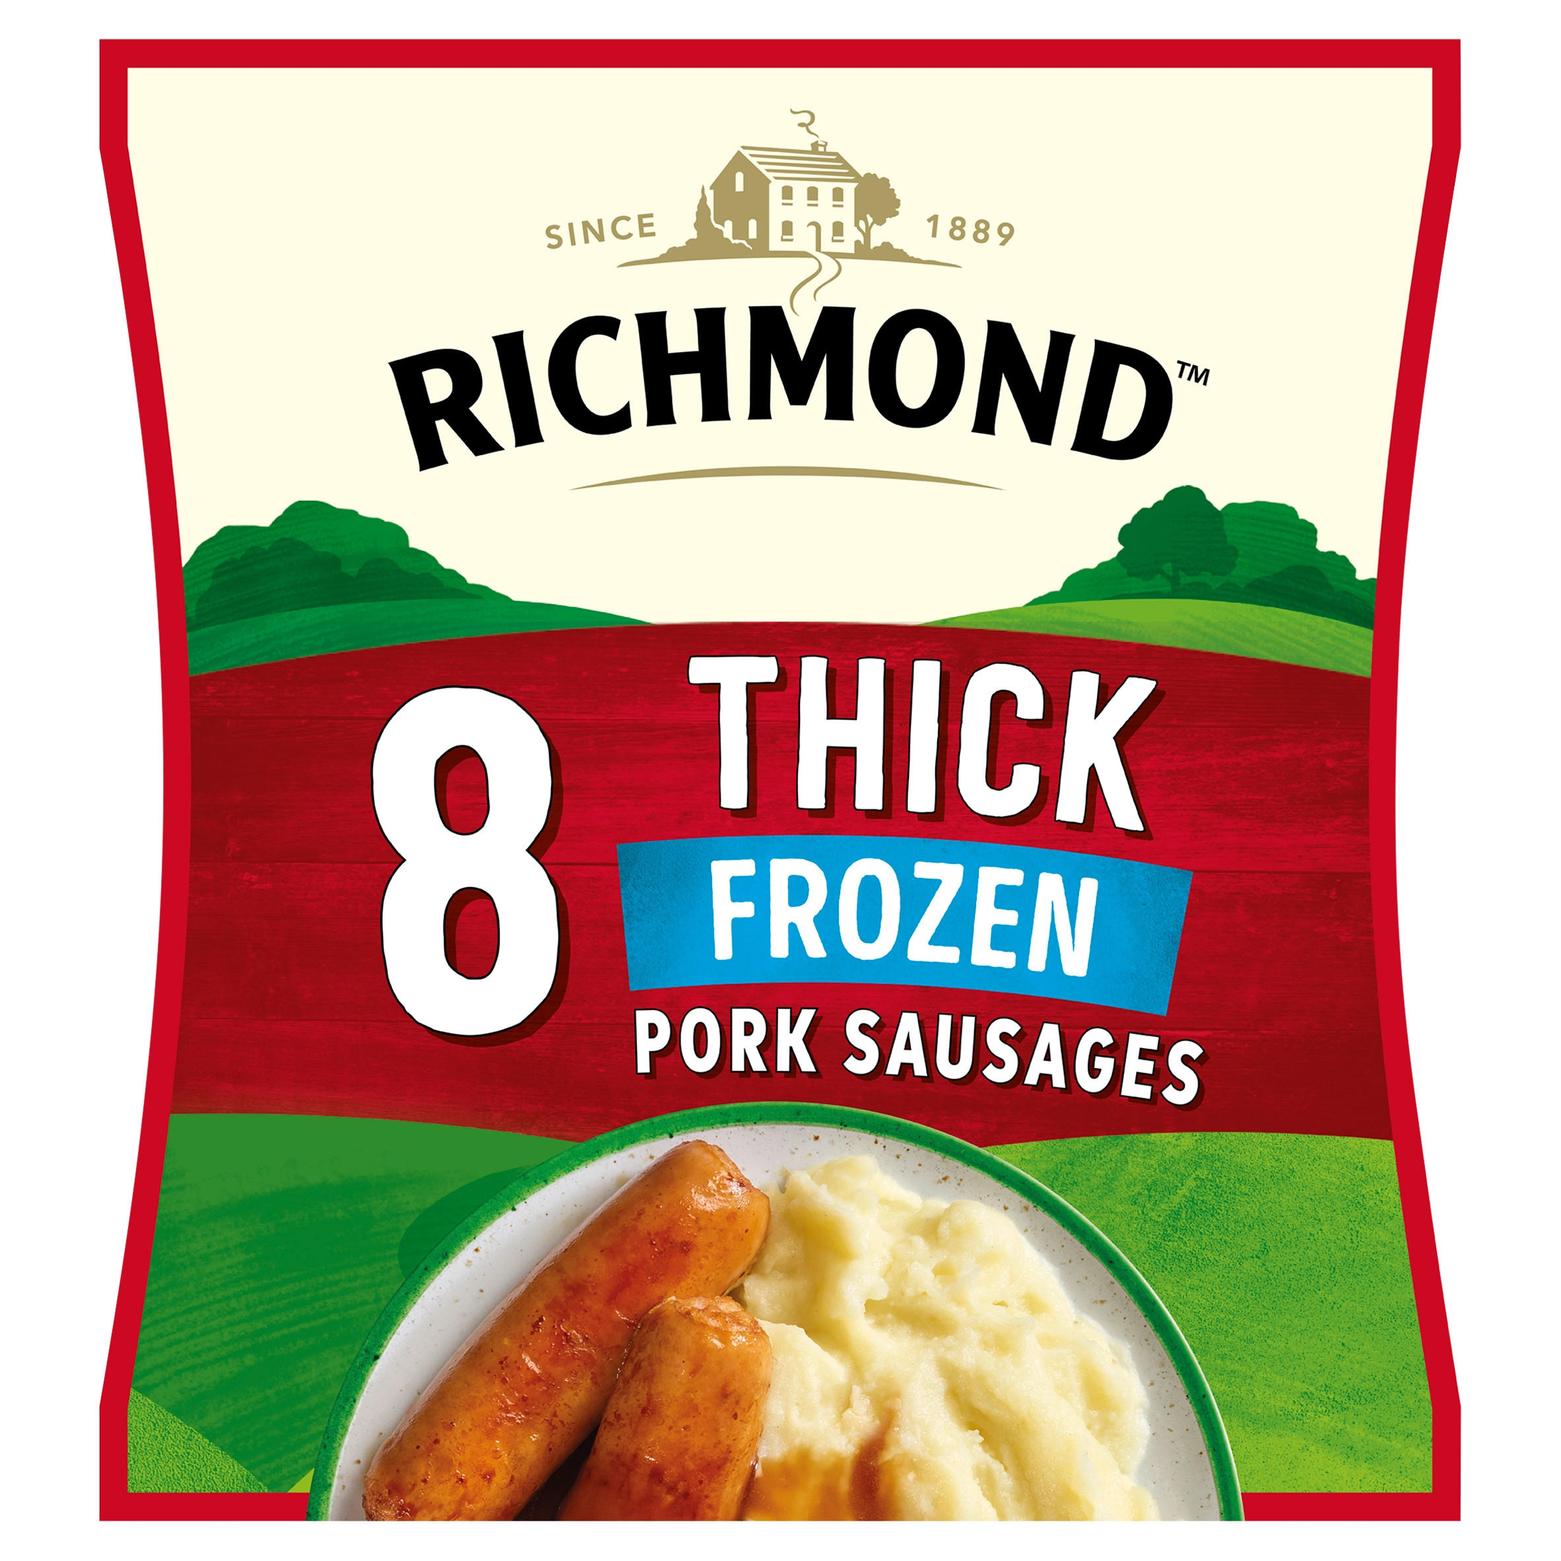 Richmond 8 Thick Pork Sausages 344g offers at £1 in Iceland